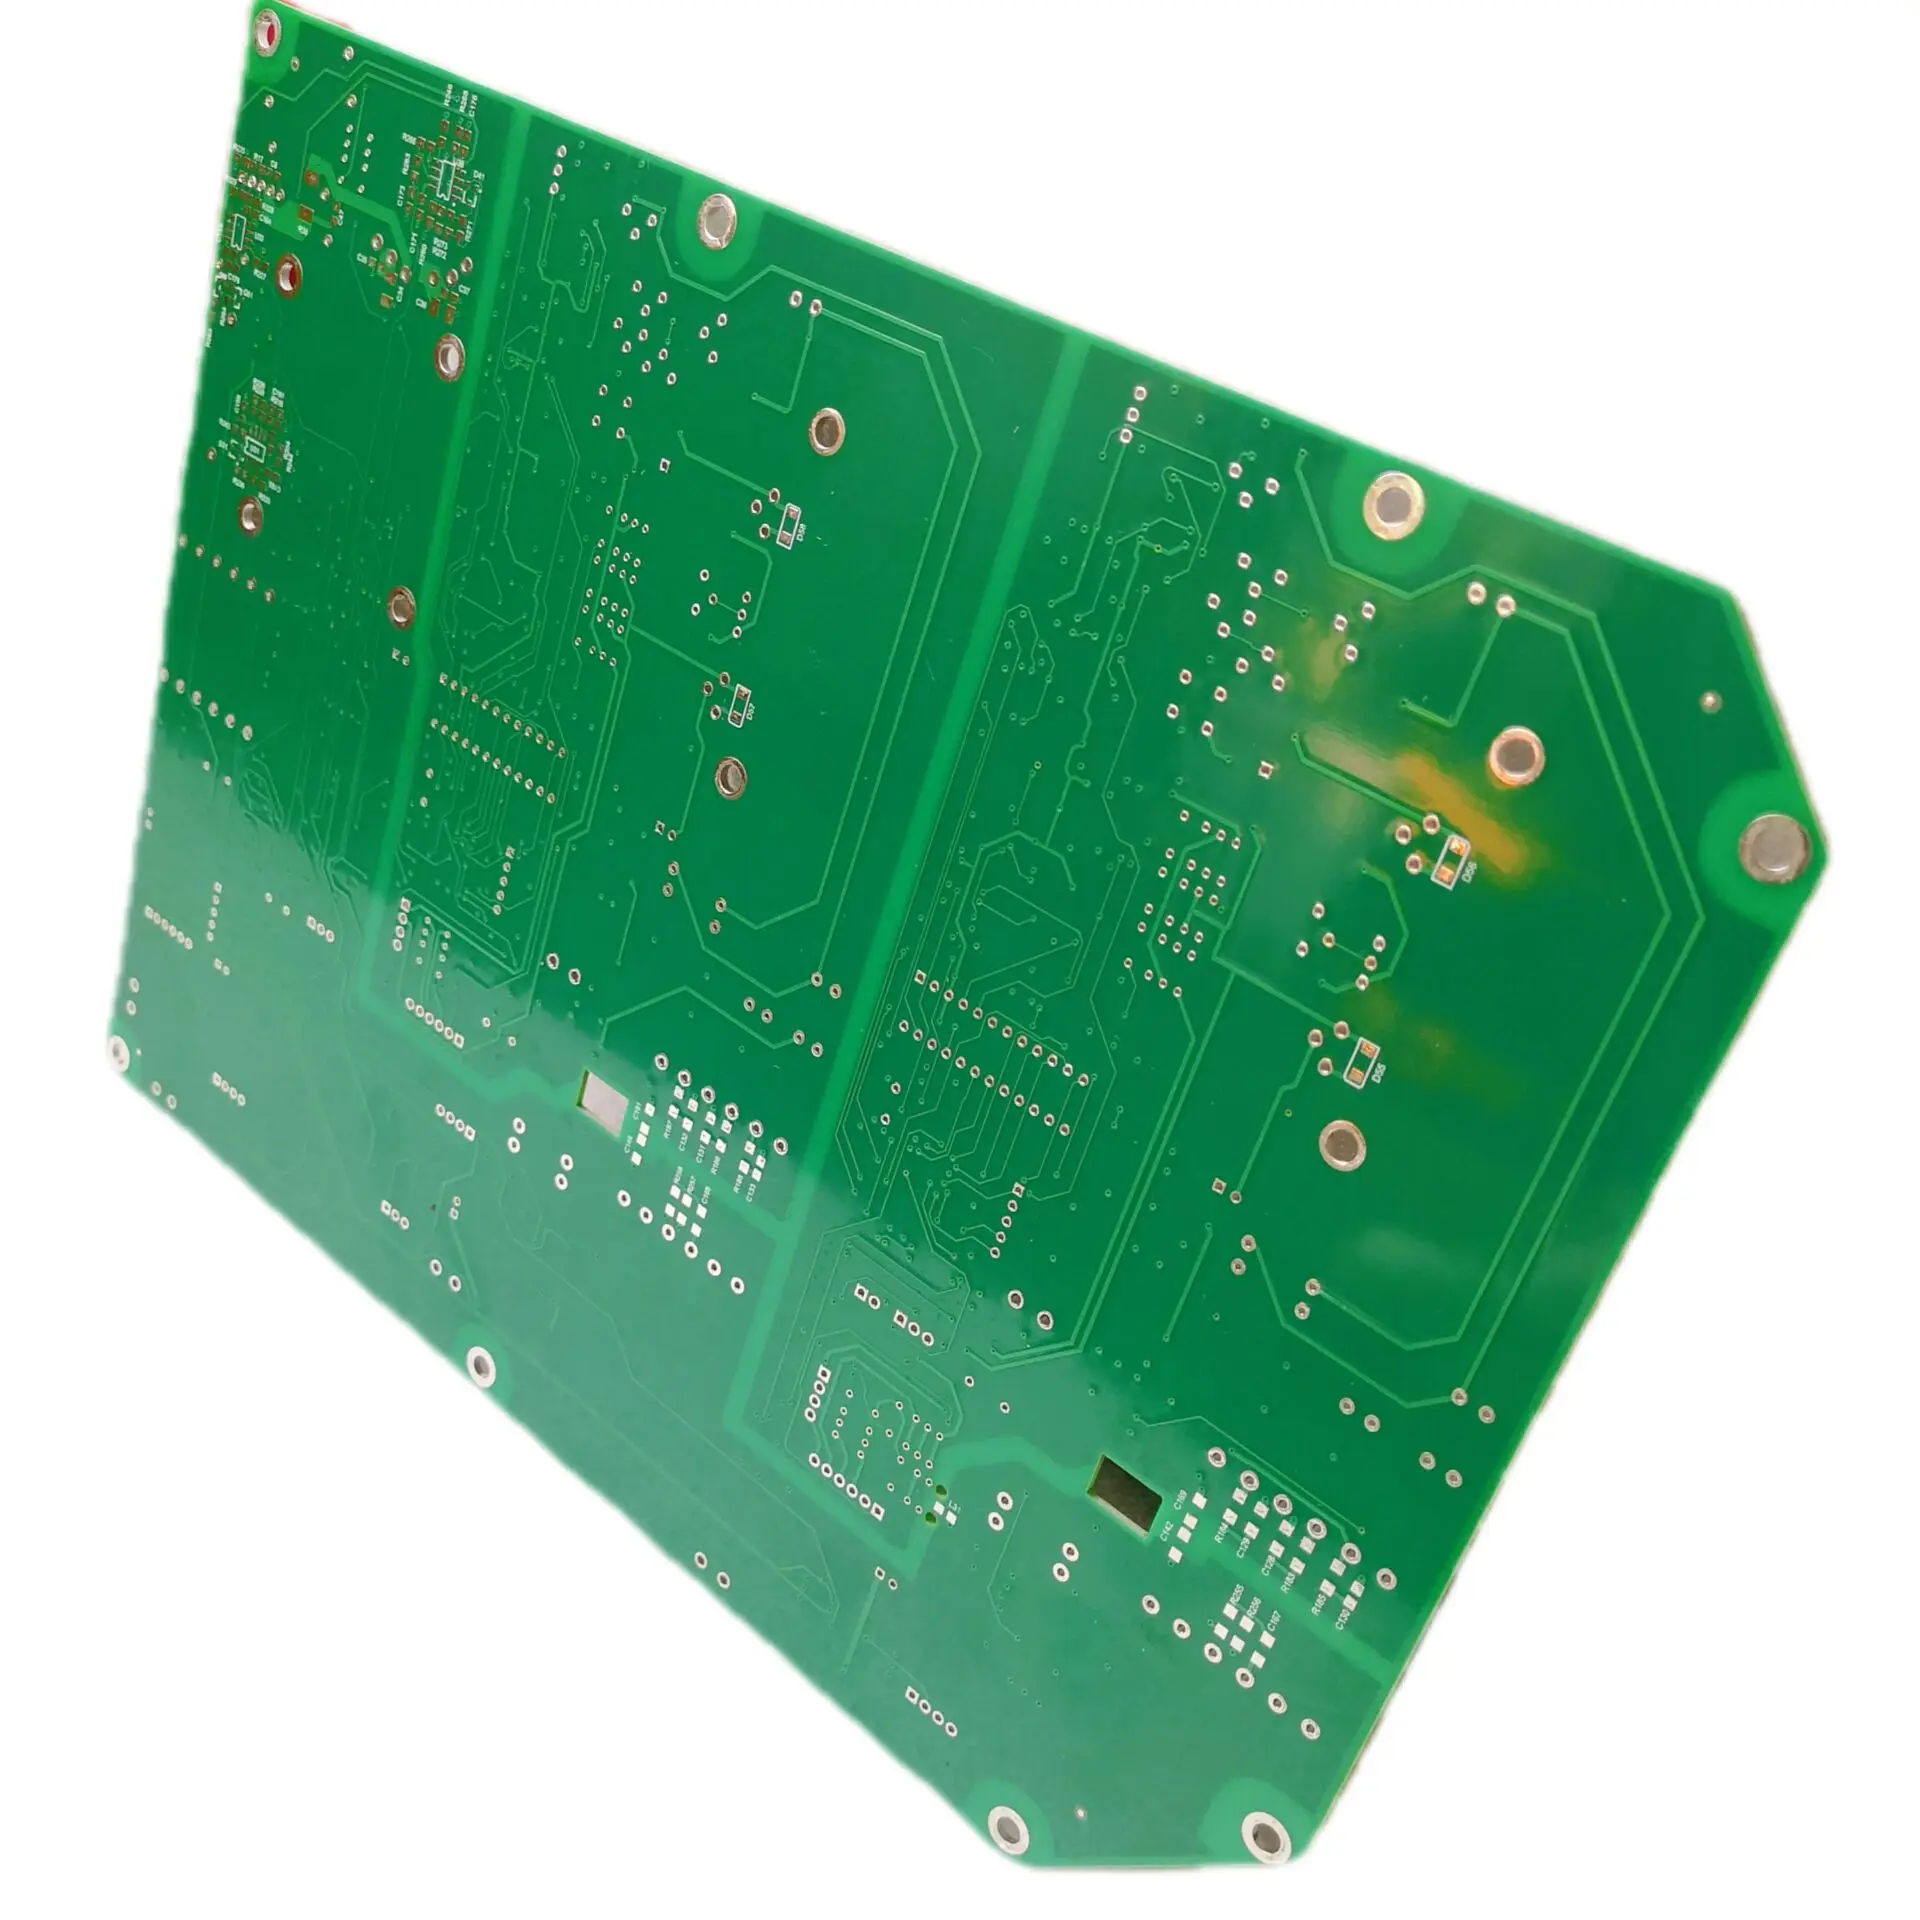 highly difficult 4 layer industry electronics Printed Circuit Board manufacture multilayer PCB vendor